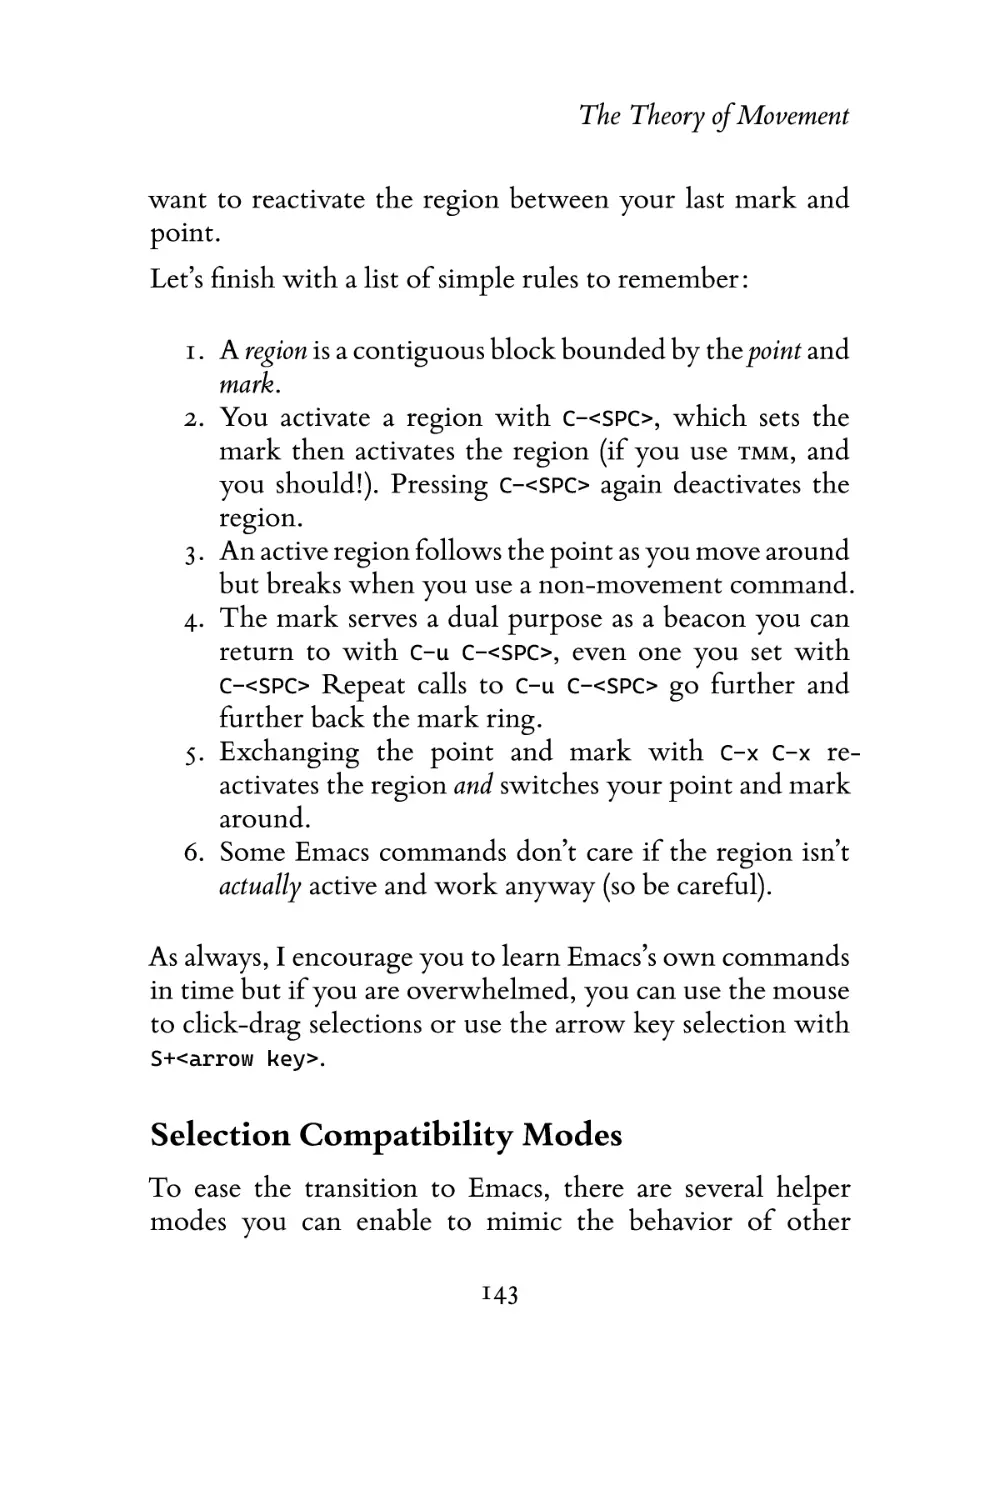 Selection Compatibility Modes